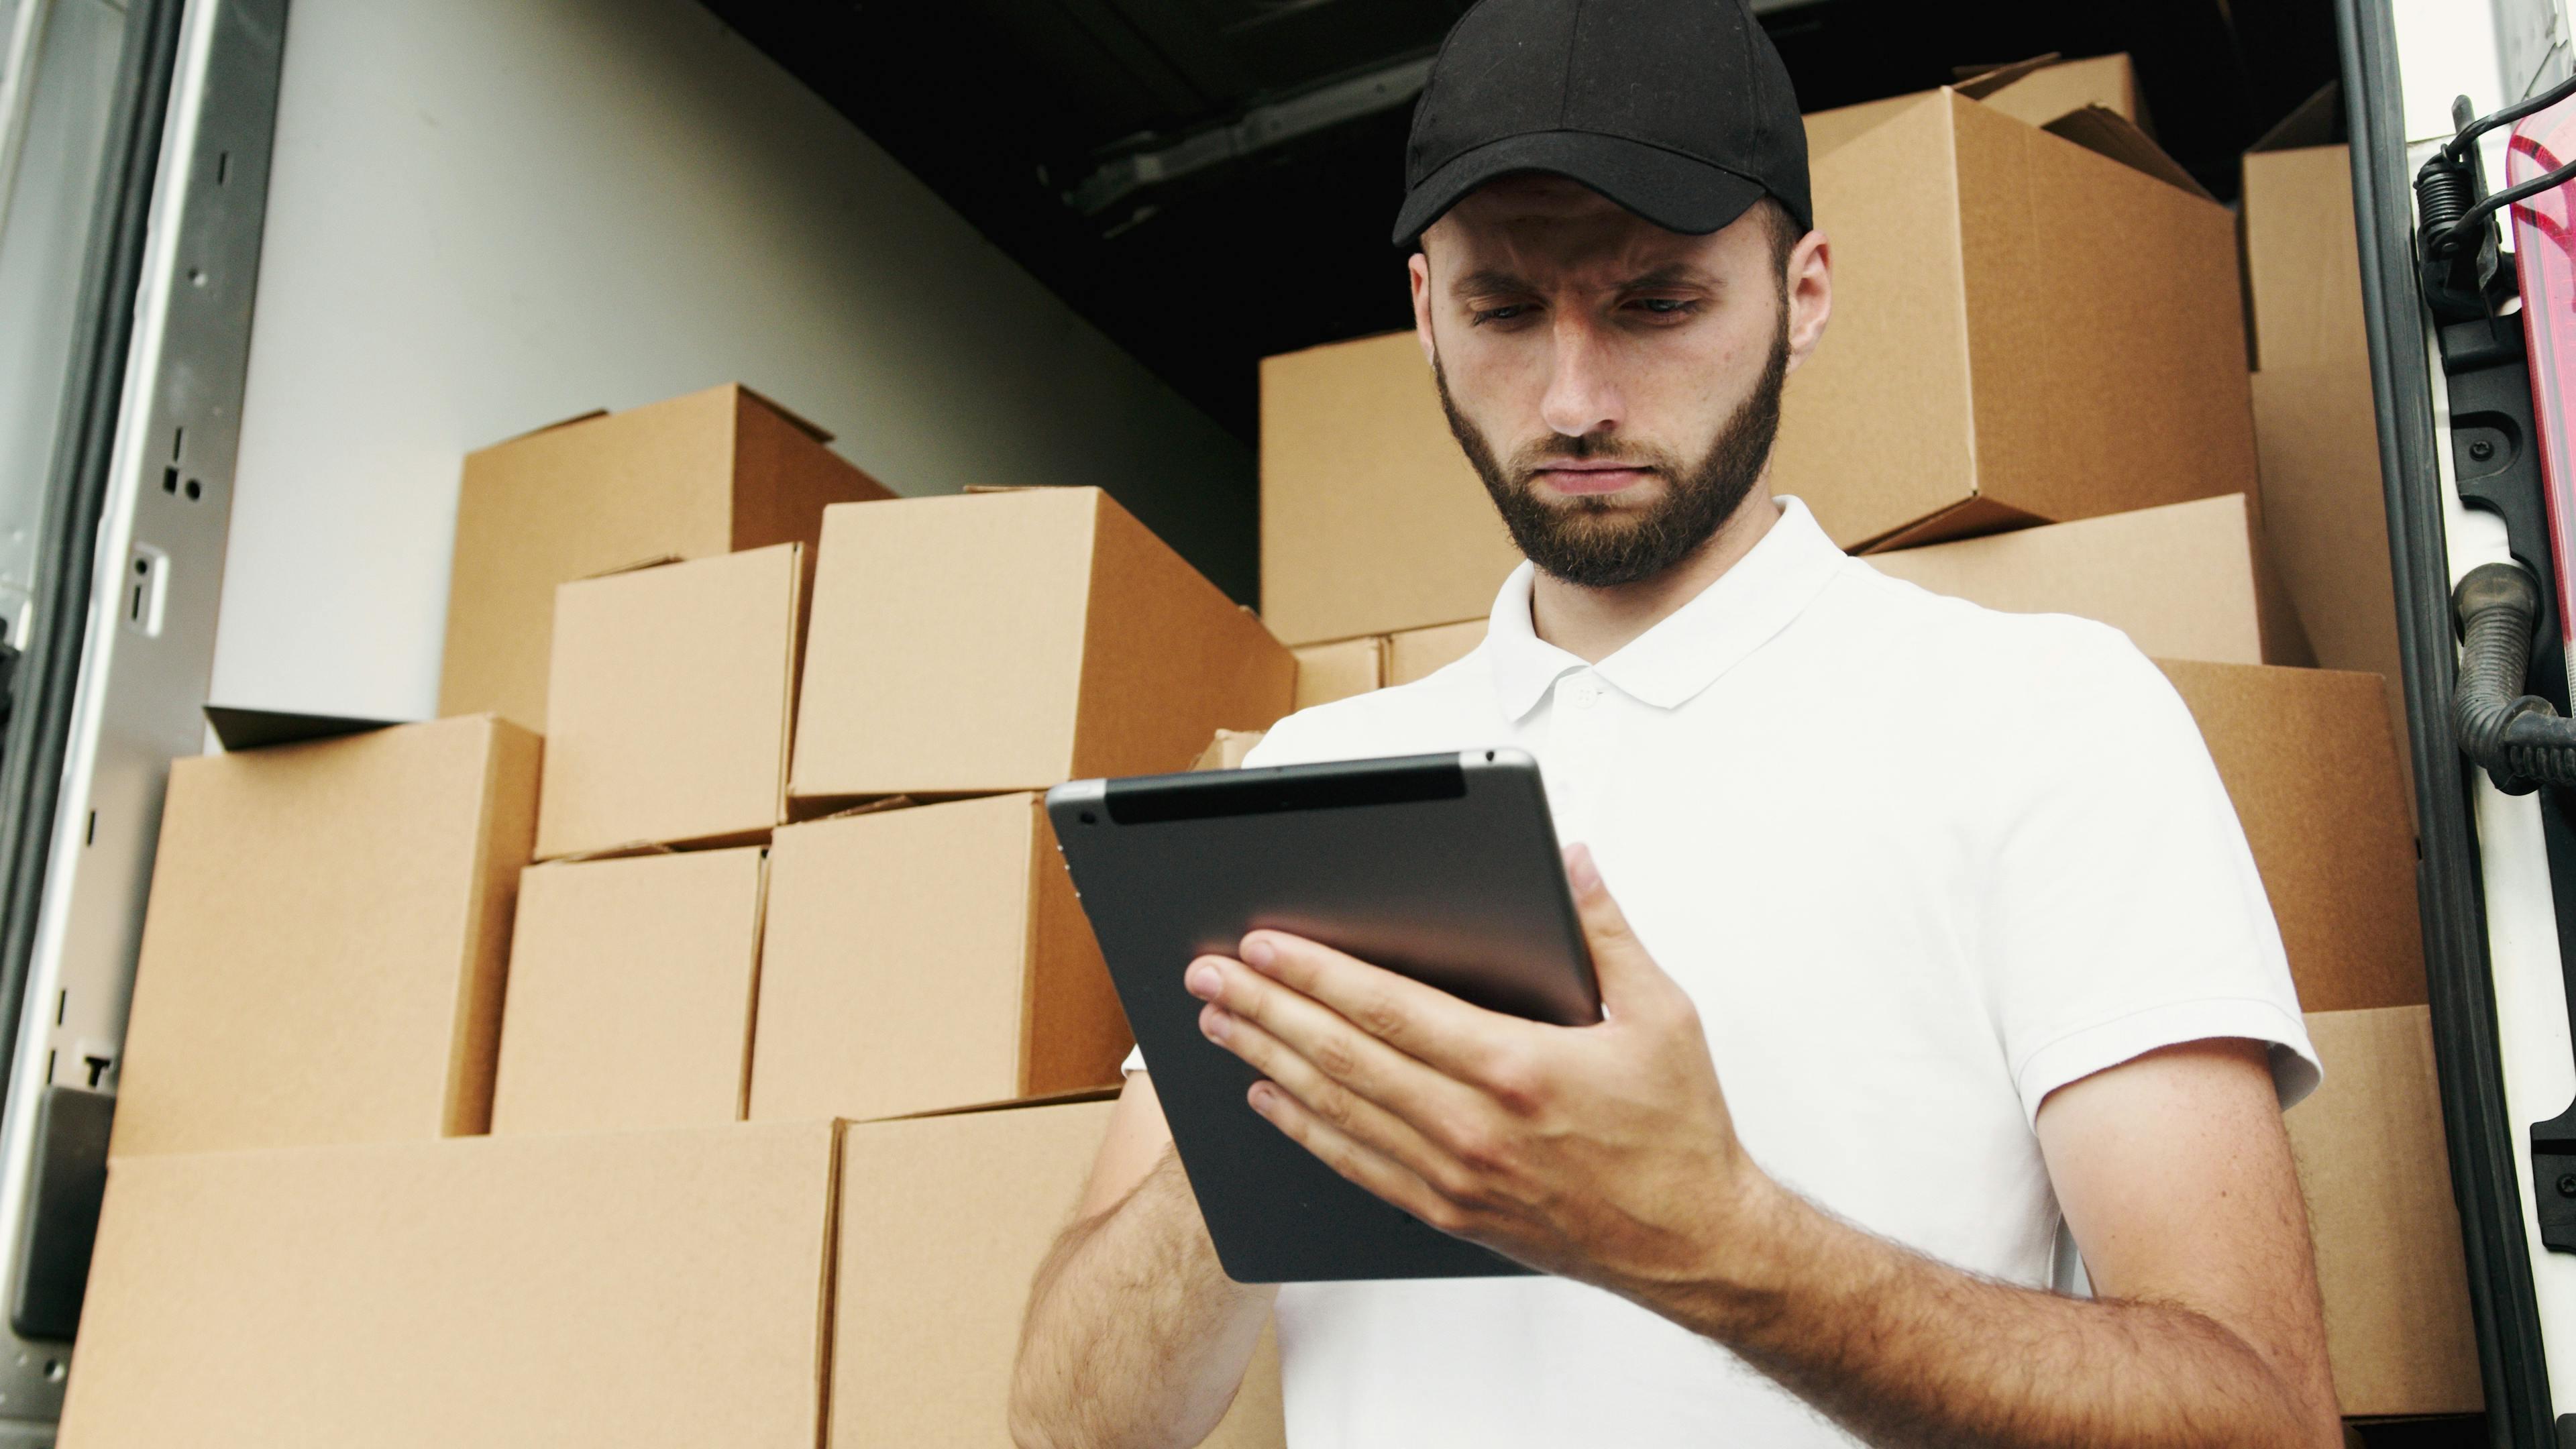 The man is checking his tablet in front of some packages.